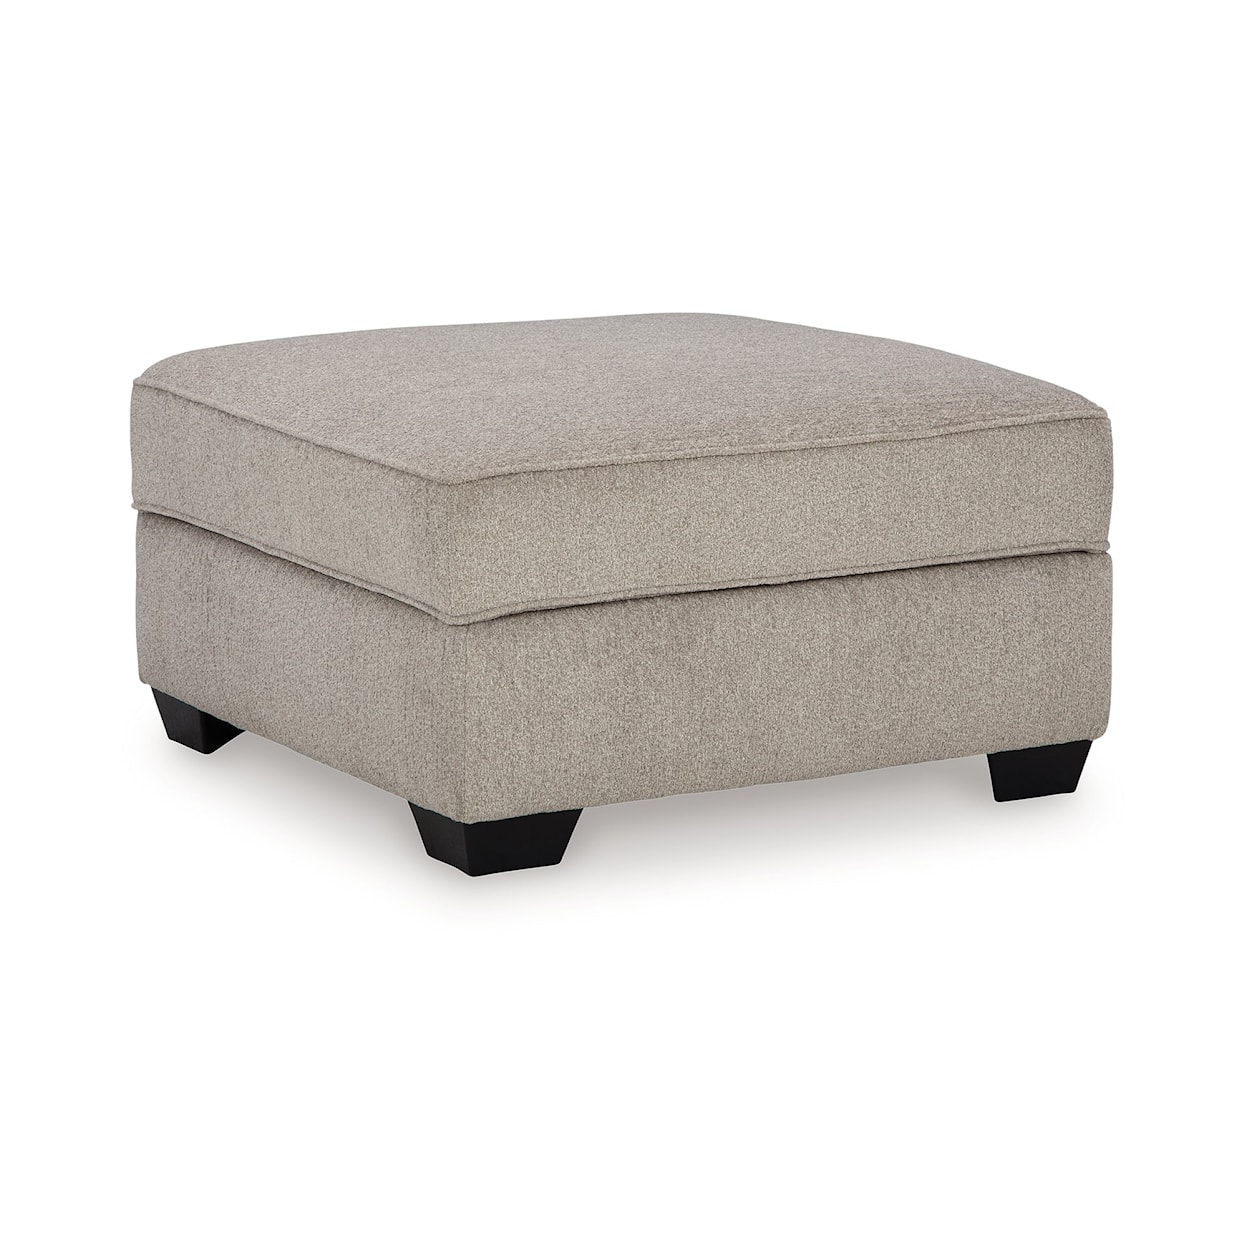 Signature Design by Ashley Claireah Ottoman With Storage